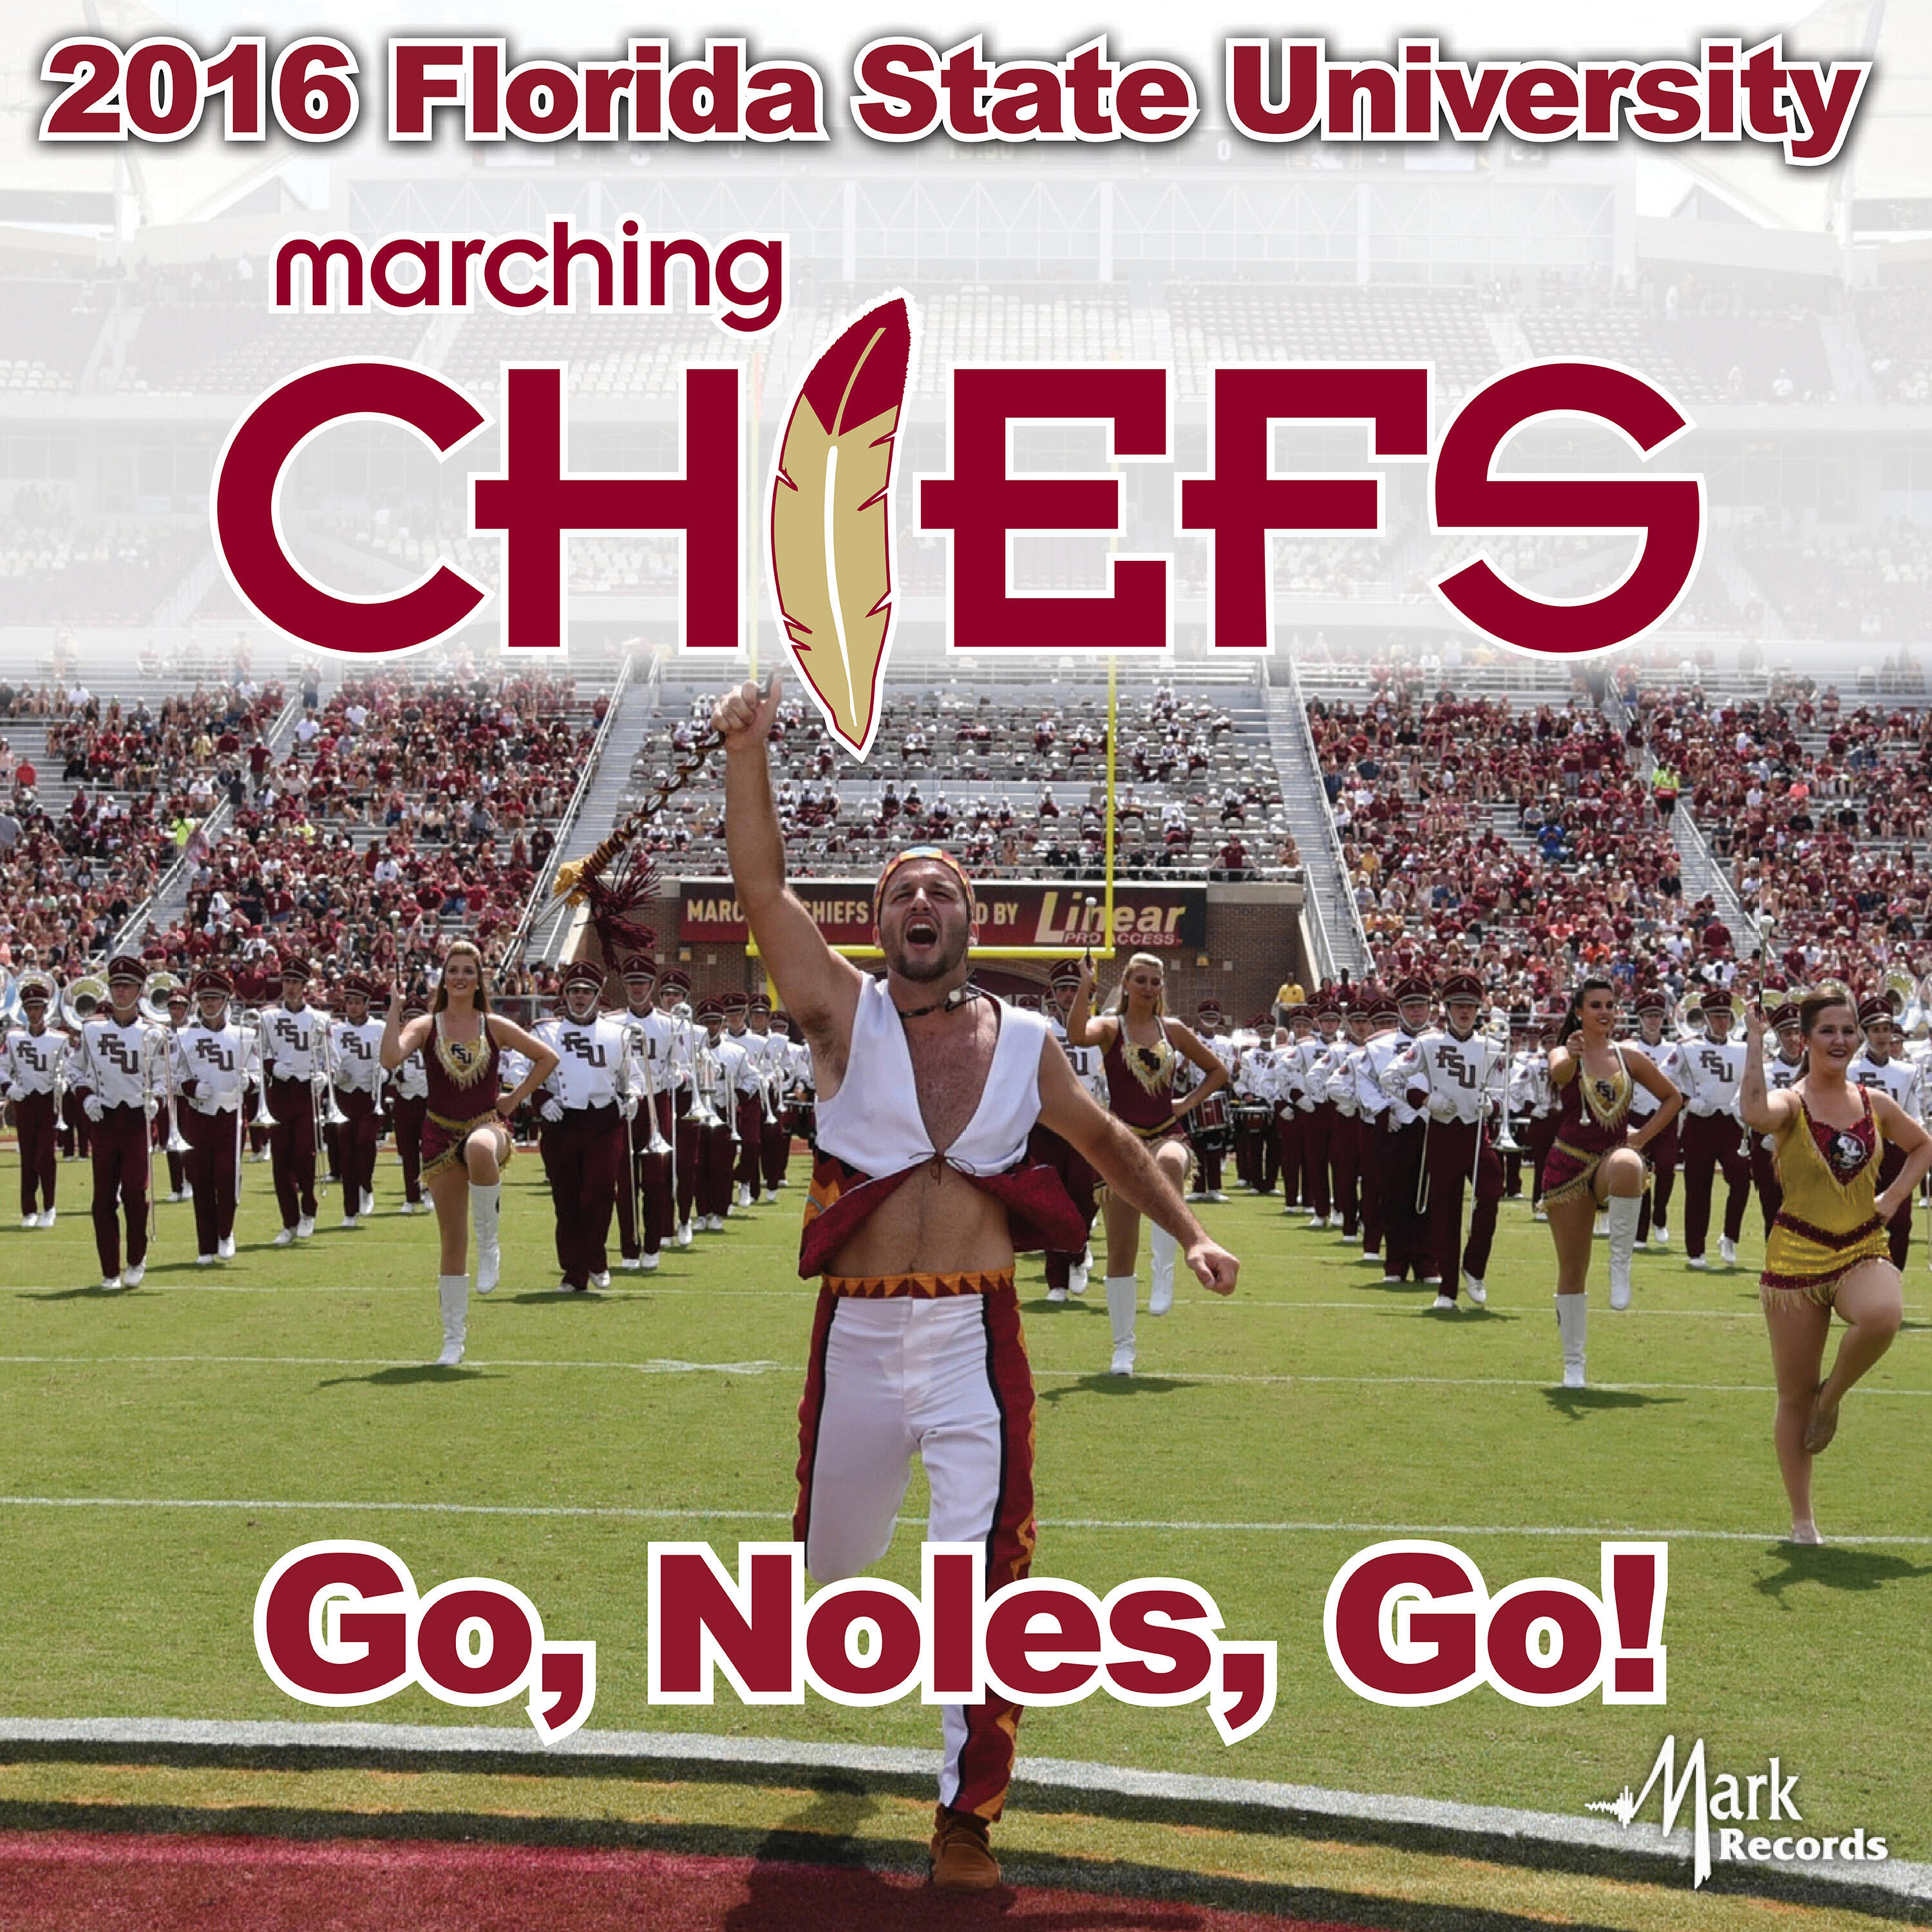 Florida State University Marching Band  Go, Noles, Go!  iHeartRadio